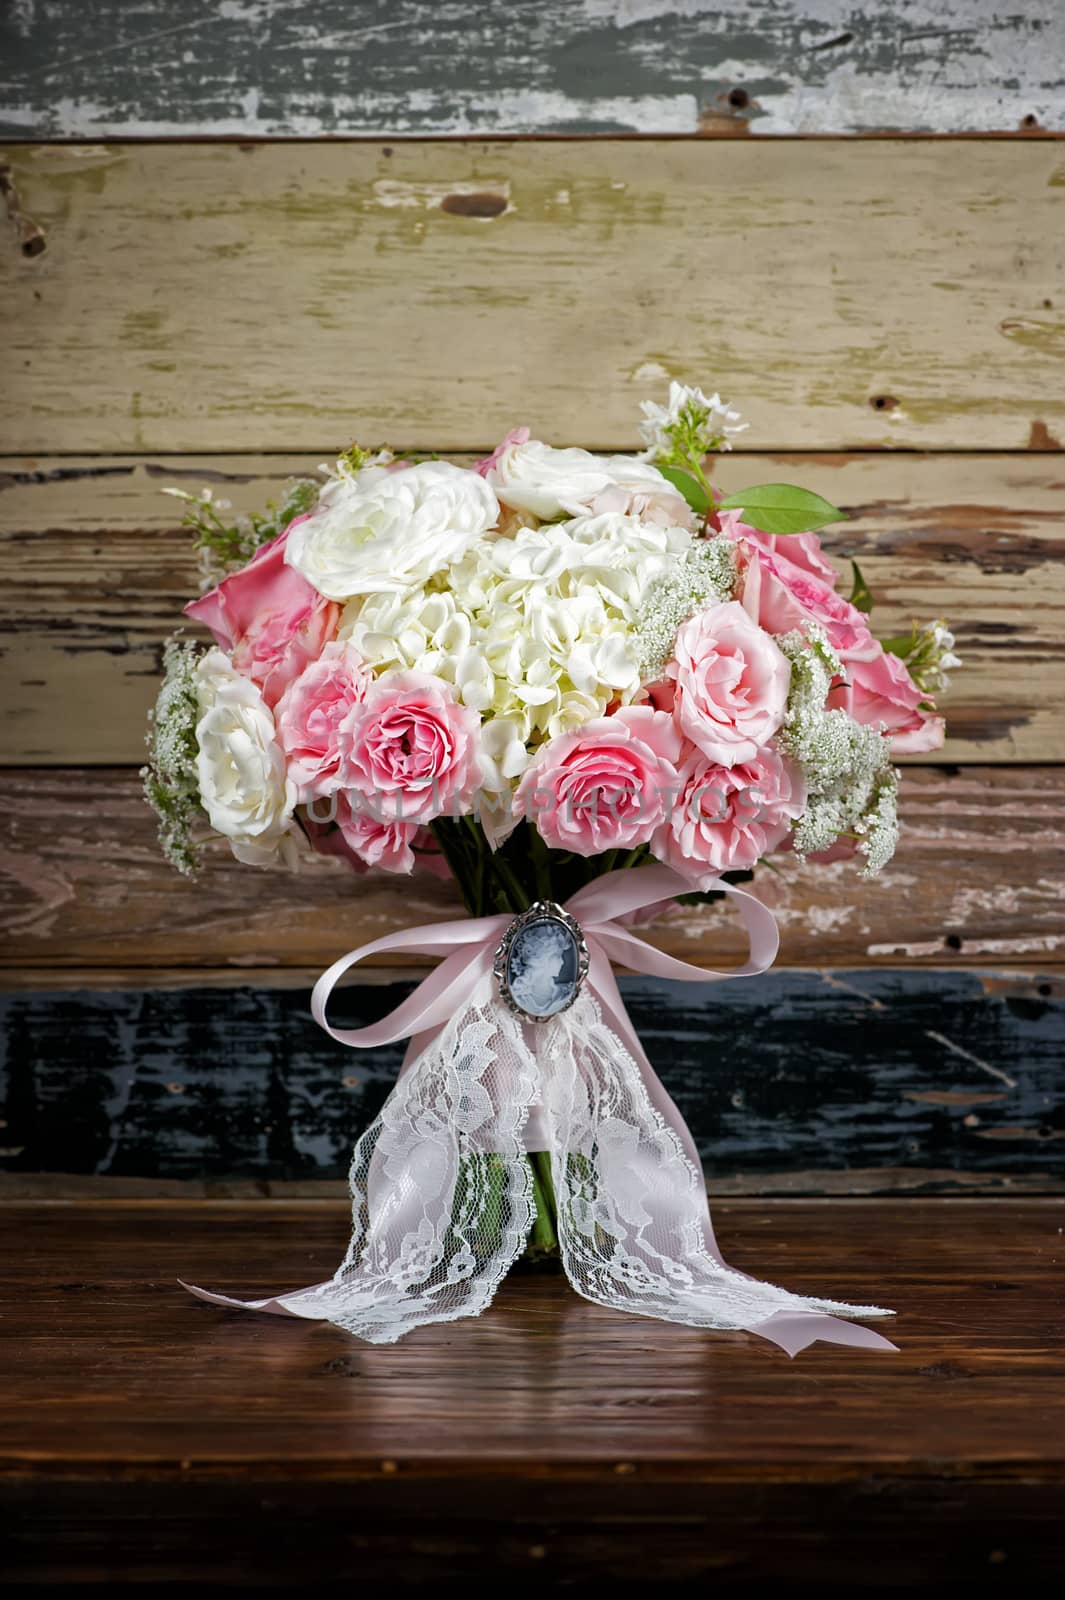 Bridal Bouquet by gregory21